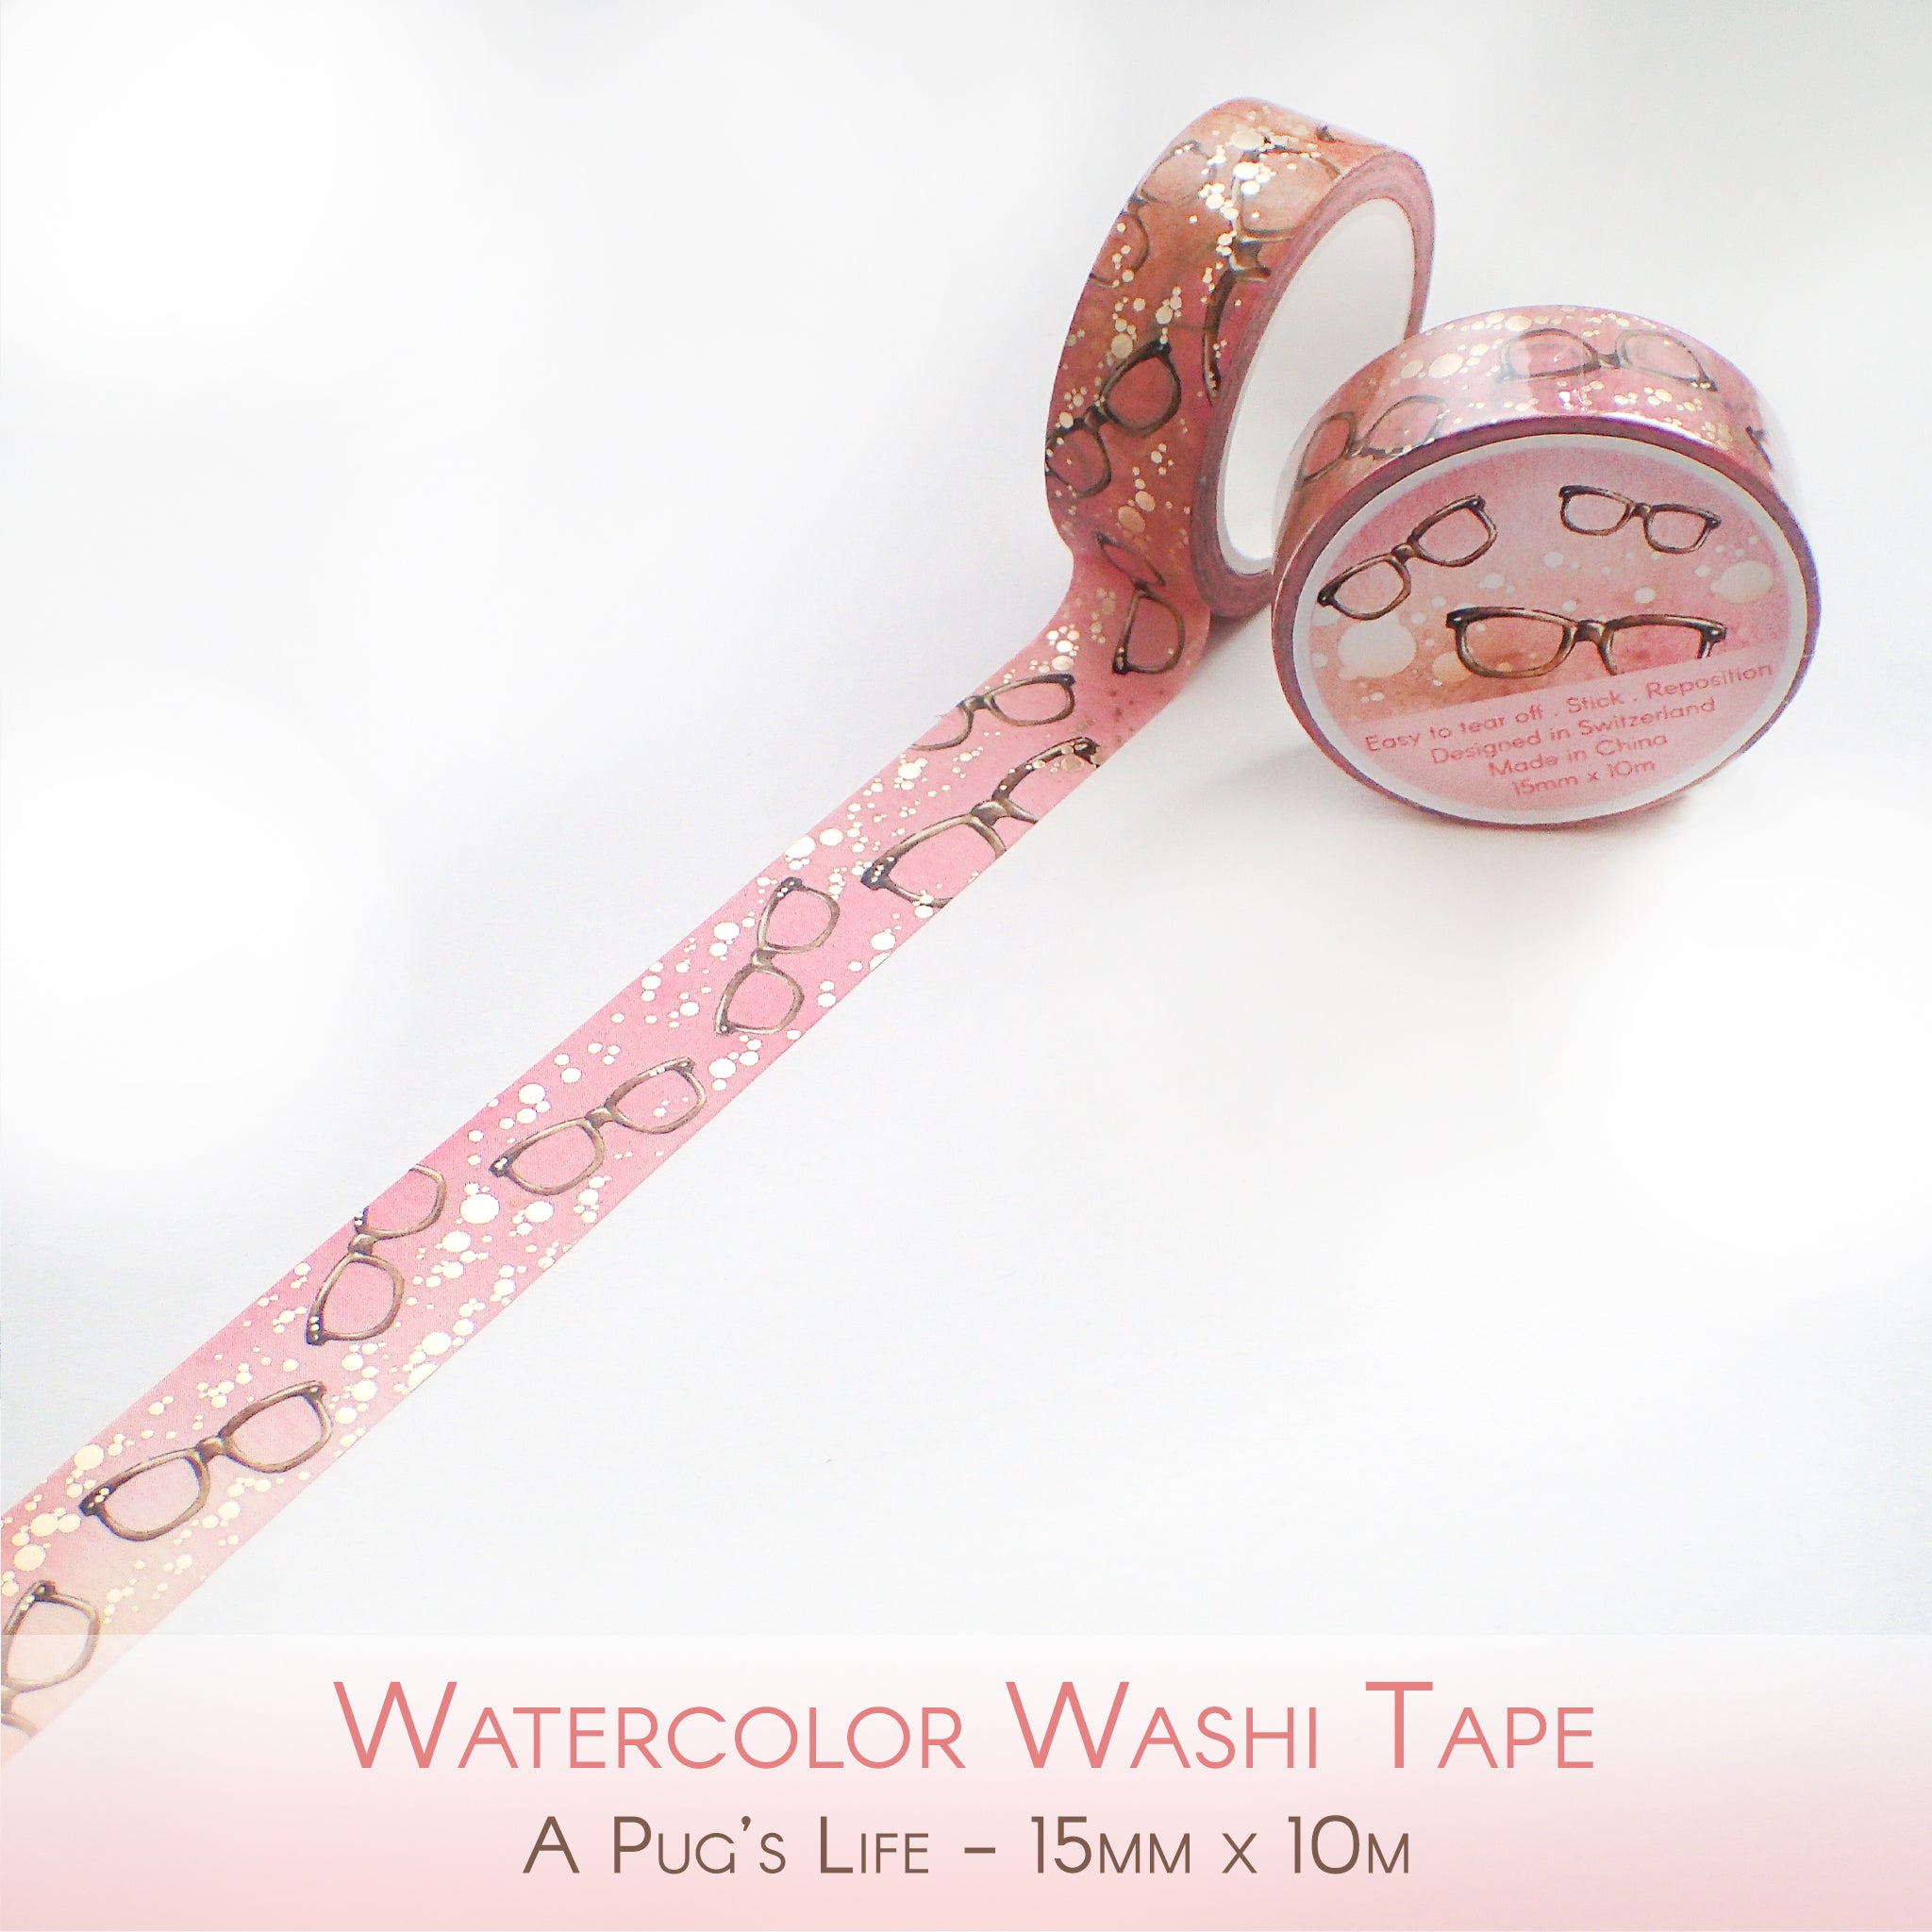 Watercolored washi tape with black glasses